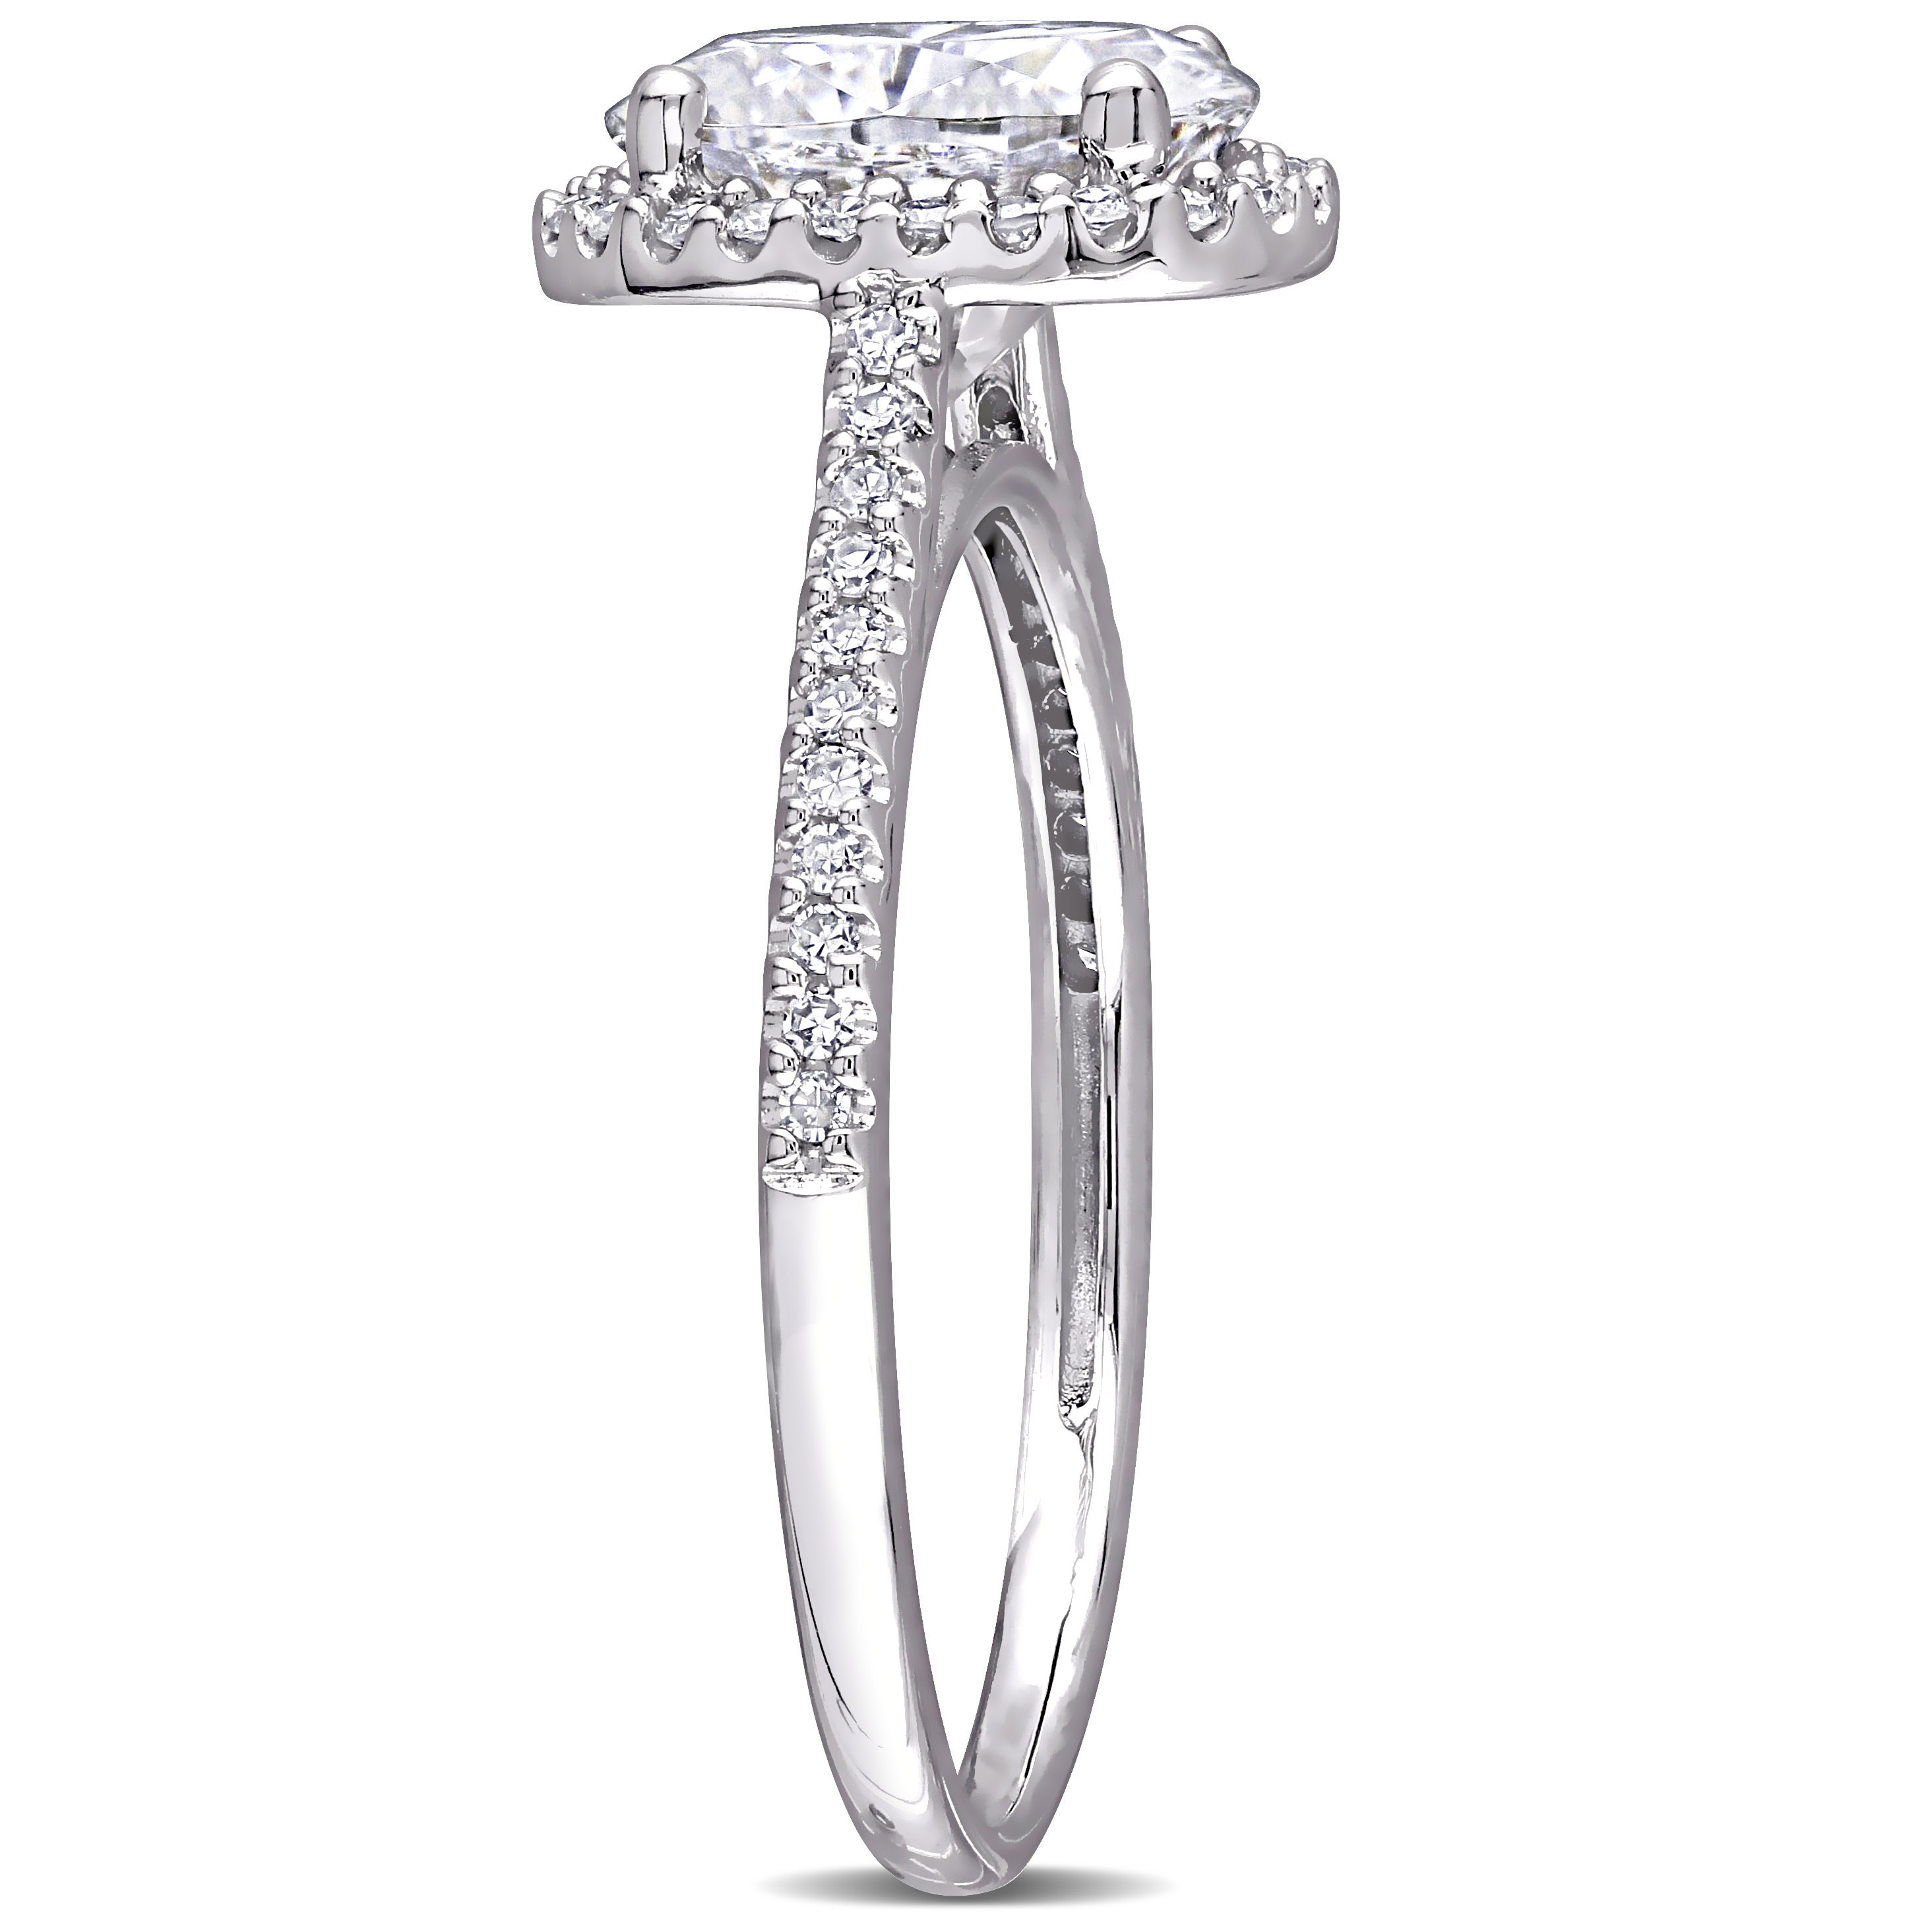 2 CT DEW Oval Created Moissanite and 1/4 CT TW Diamond Double Halo Engagement Ring in 14k White Gold